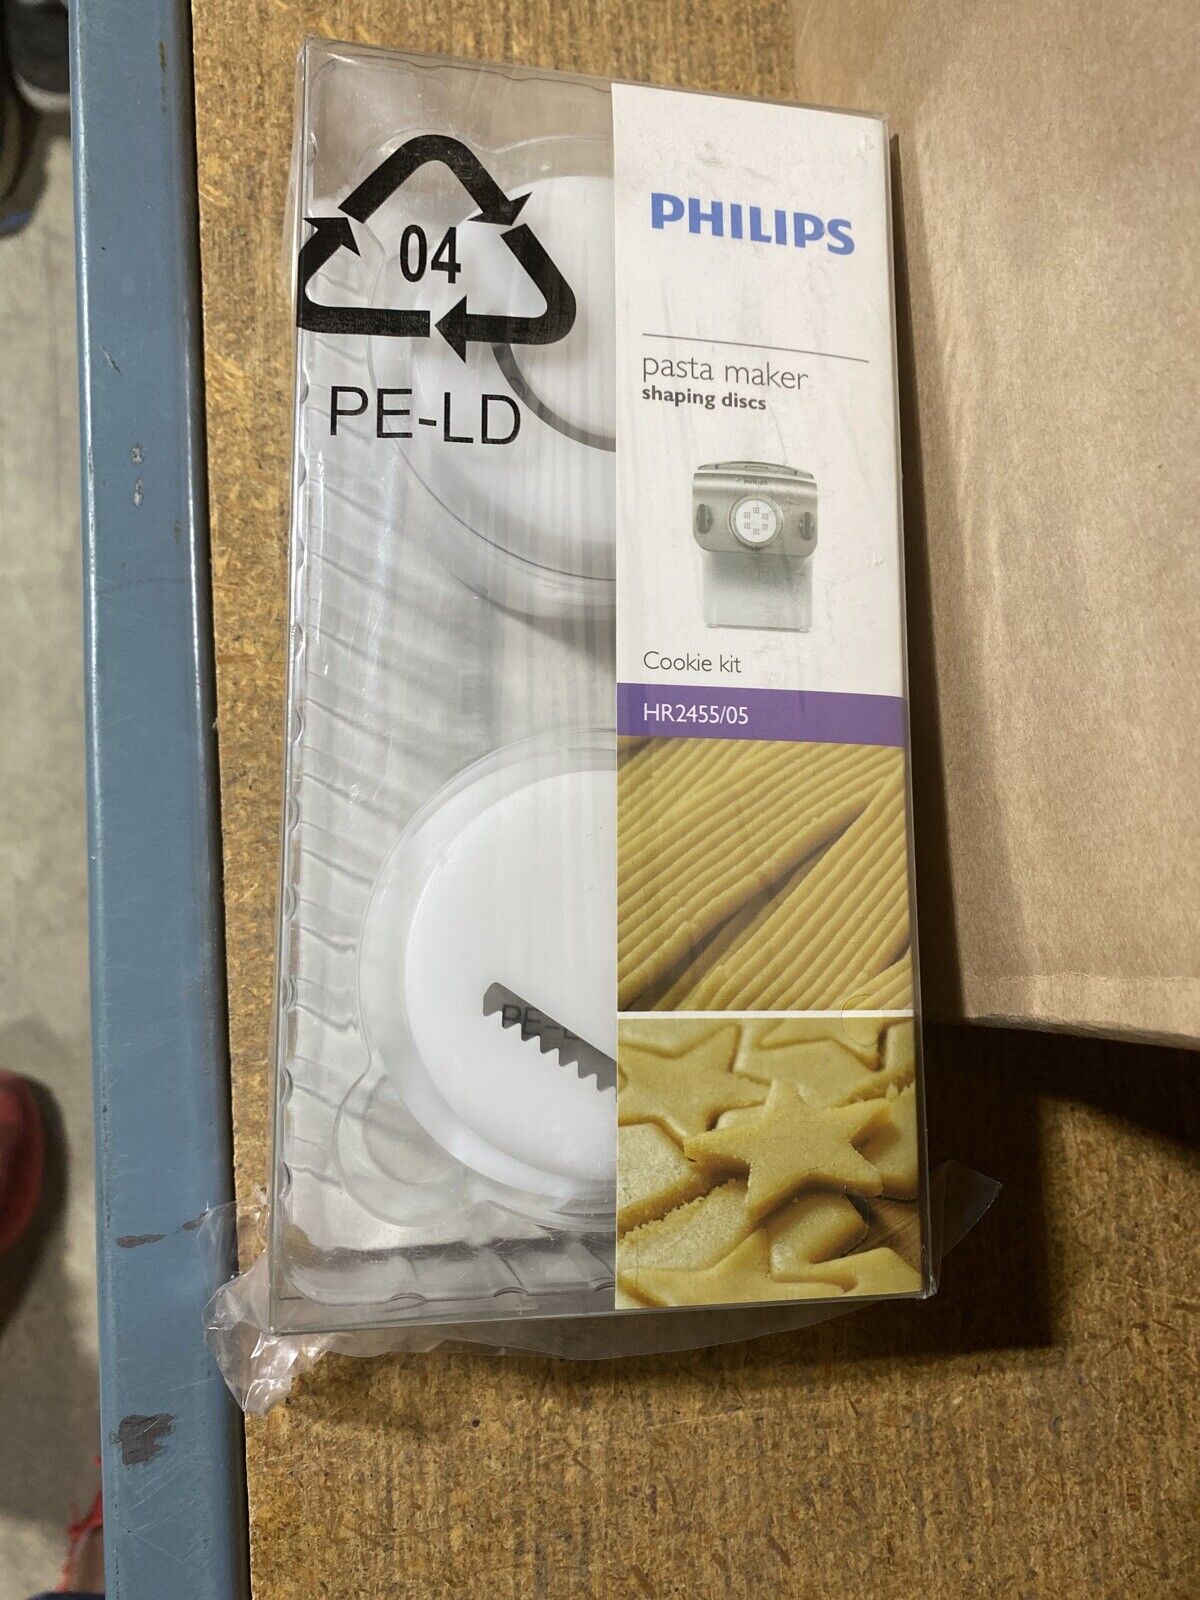 Philips Cookie Kit Shaping Discs HR2455/05 fits Philips Pasta Maker NEW in  box